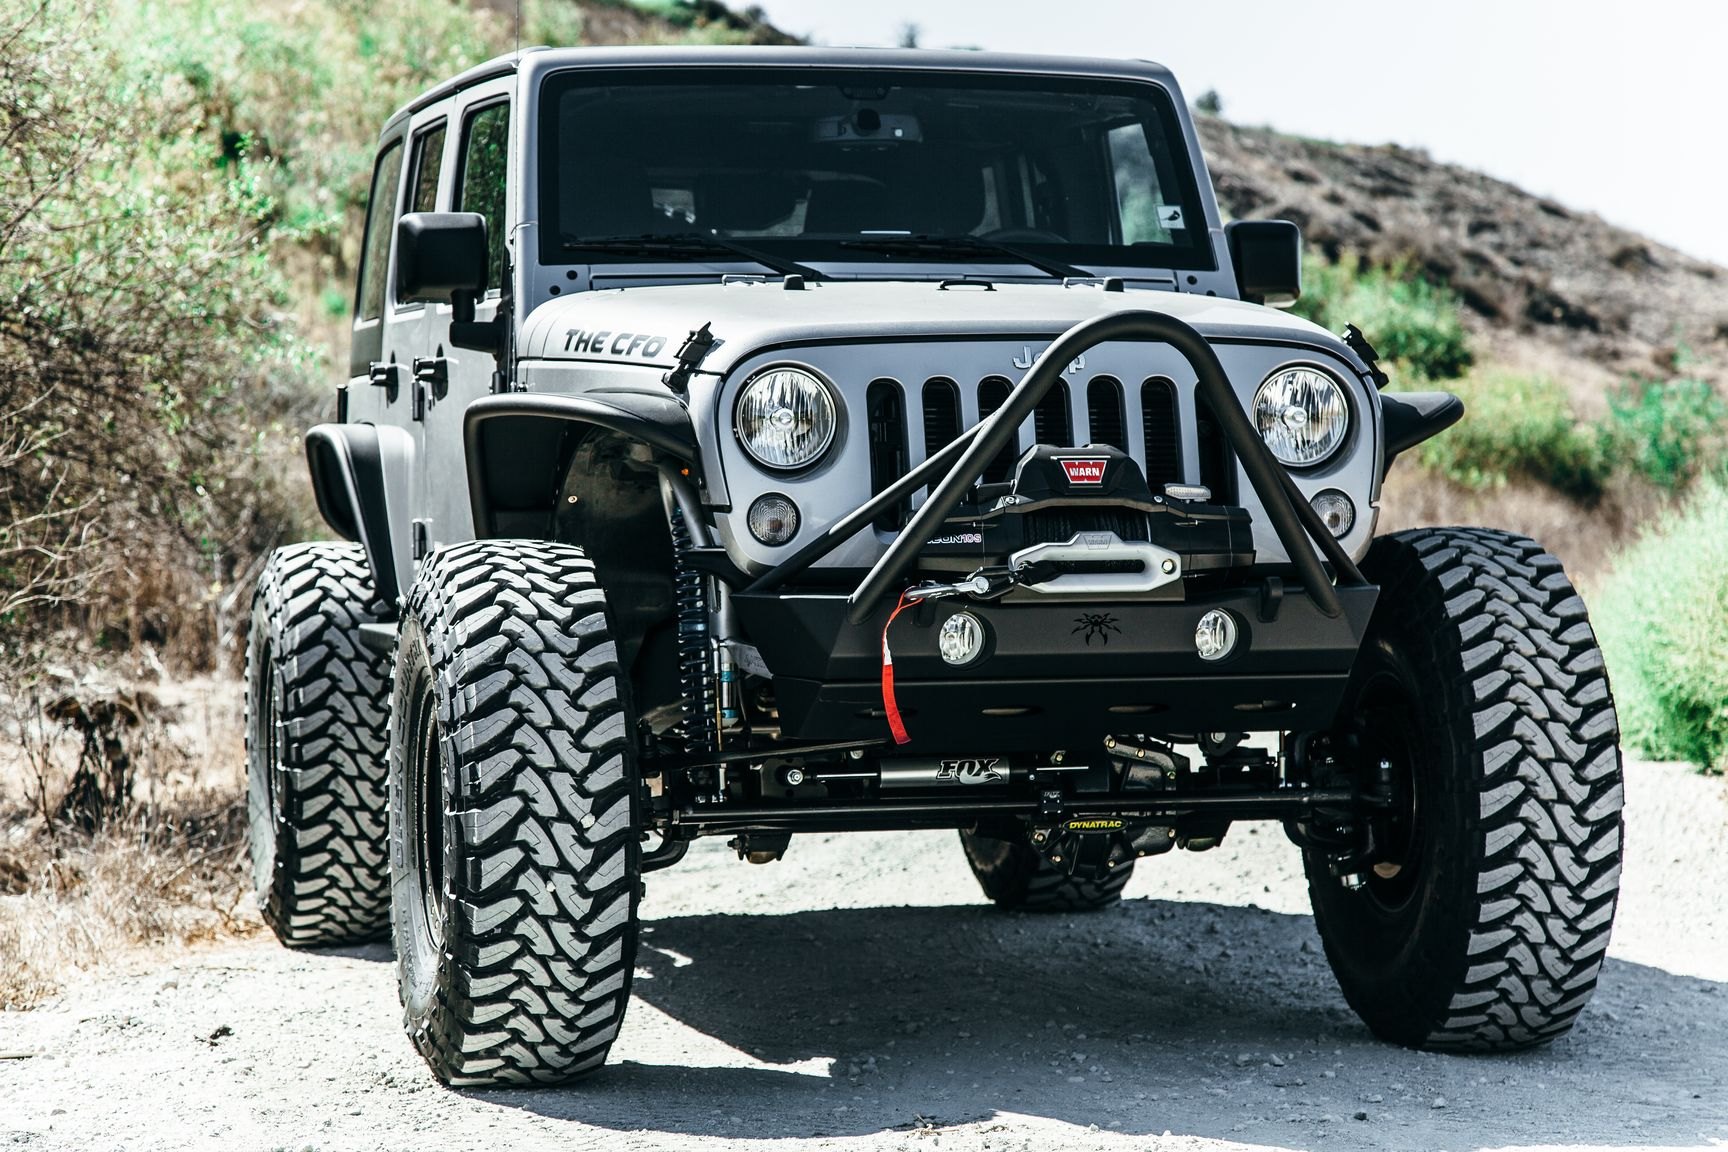 Gray Lifted Jeep Wrangler Fully Loaded with Off-Road Custom Accessories —   Gallery